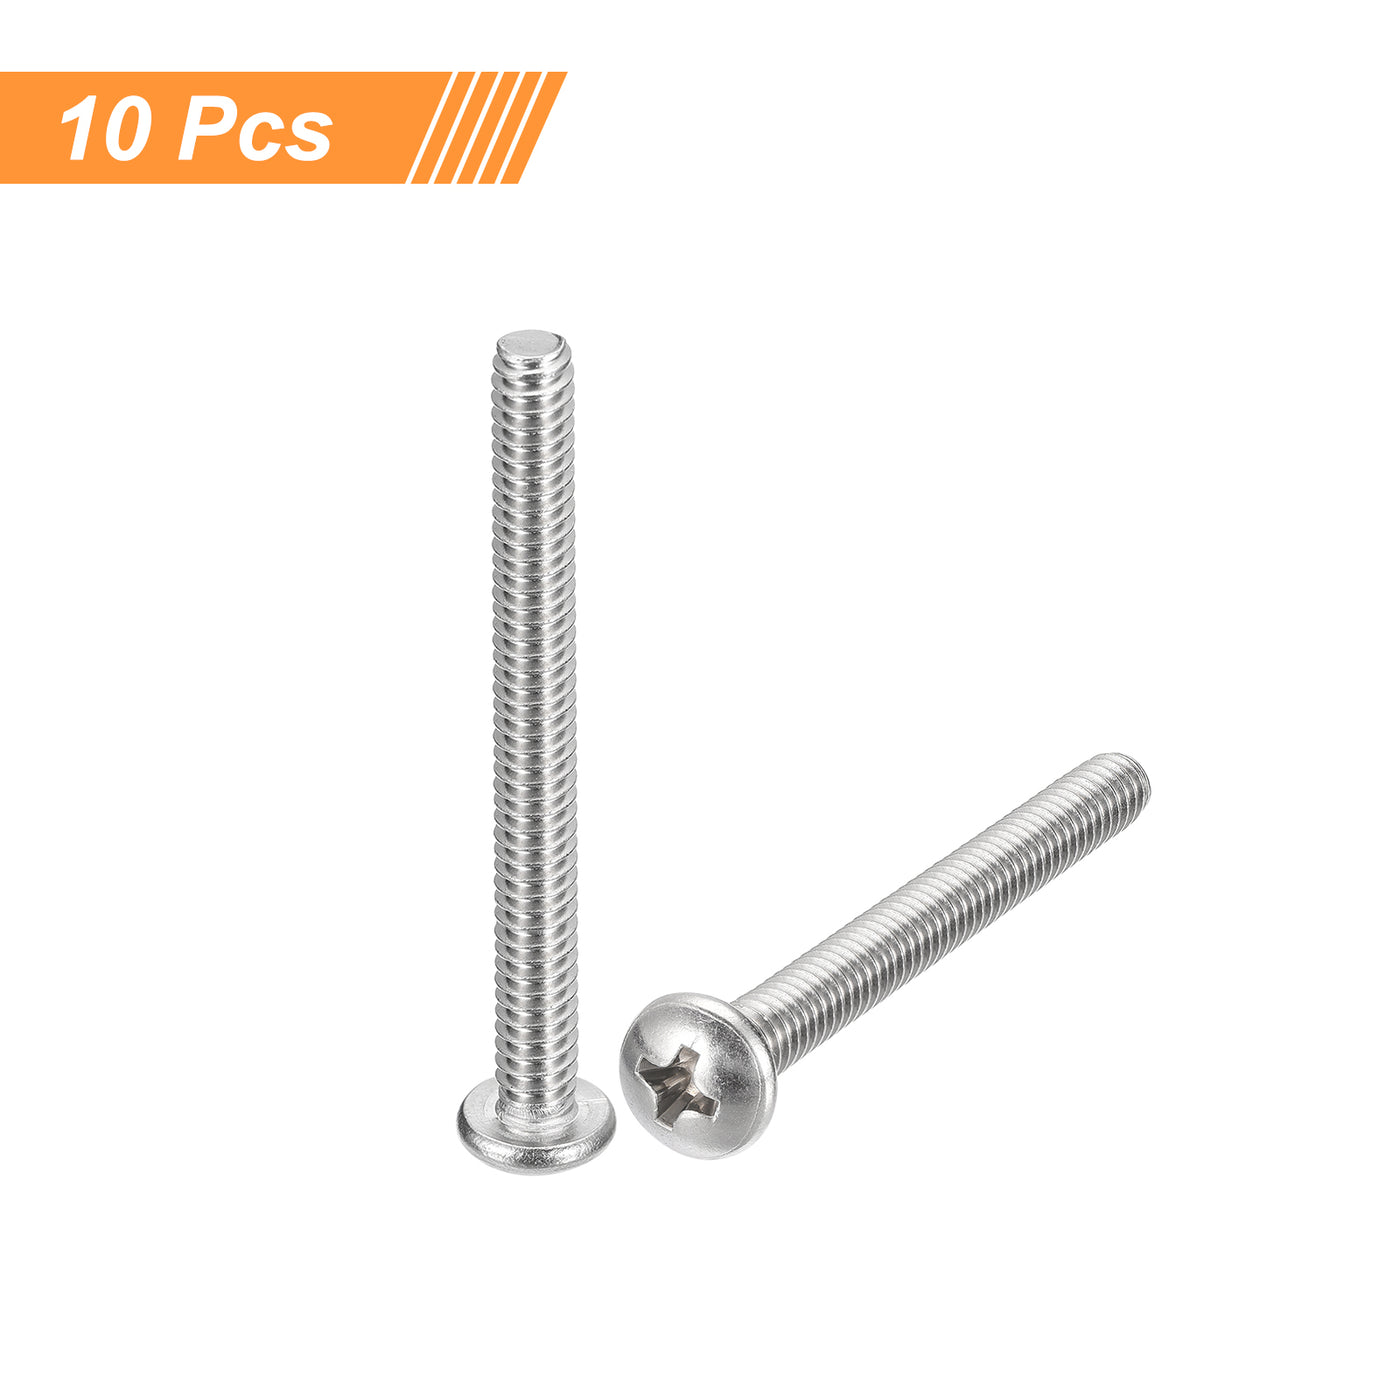 uxcell Uxcell #10-24x2" Pan Head Machine Screws, Stainless Steel 18-8 Screw, Pack of 10